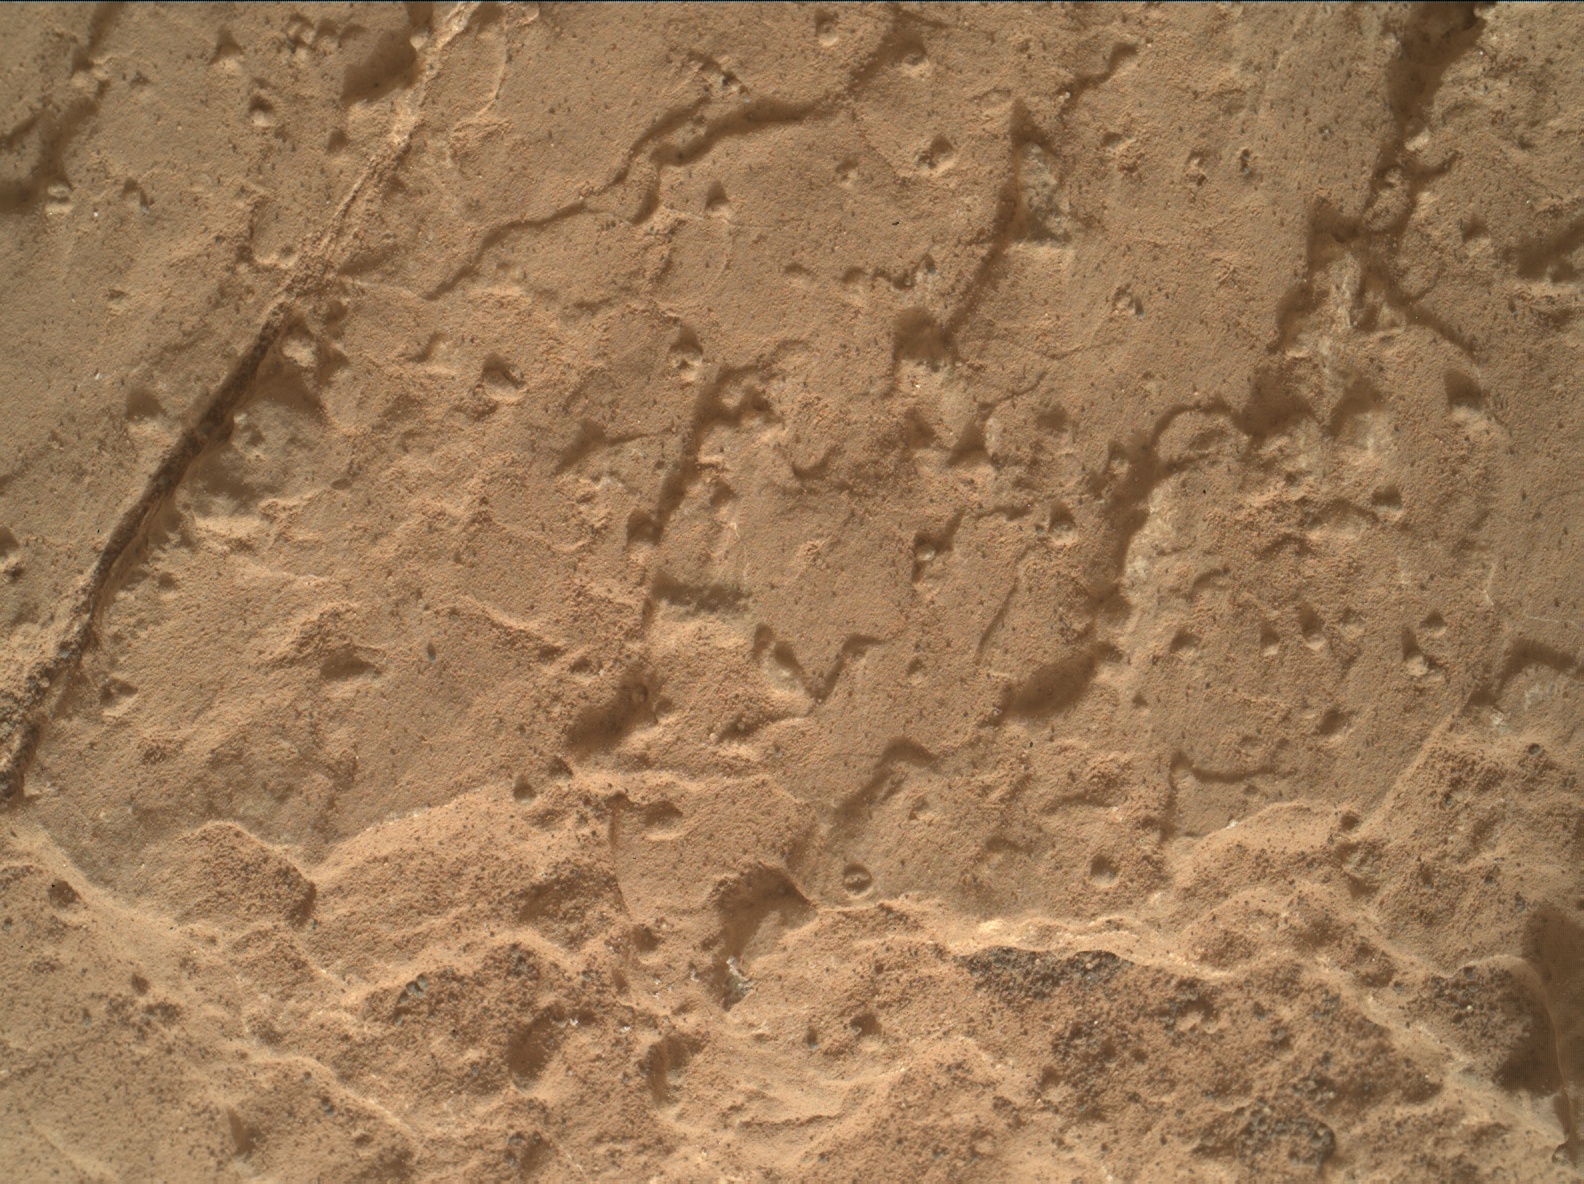 Nasa's Mars rover Curiosity acquired this image using its Mars Hand Lens Imager (MAHLI) on Sol 2803